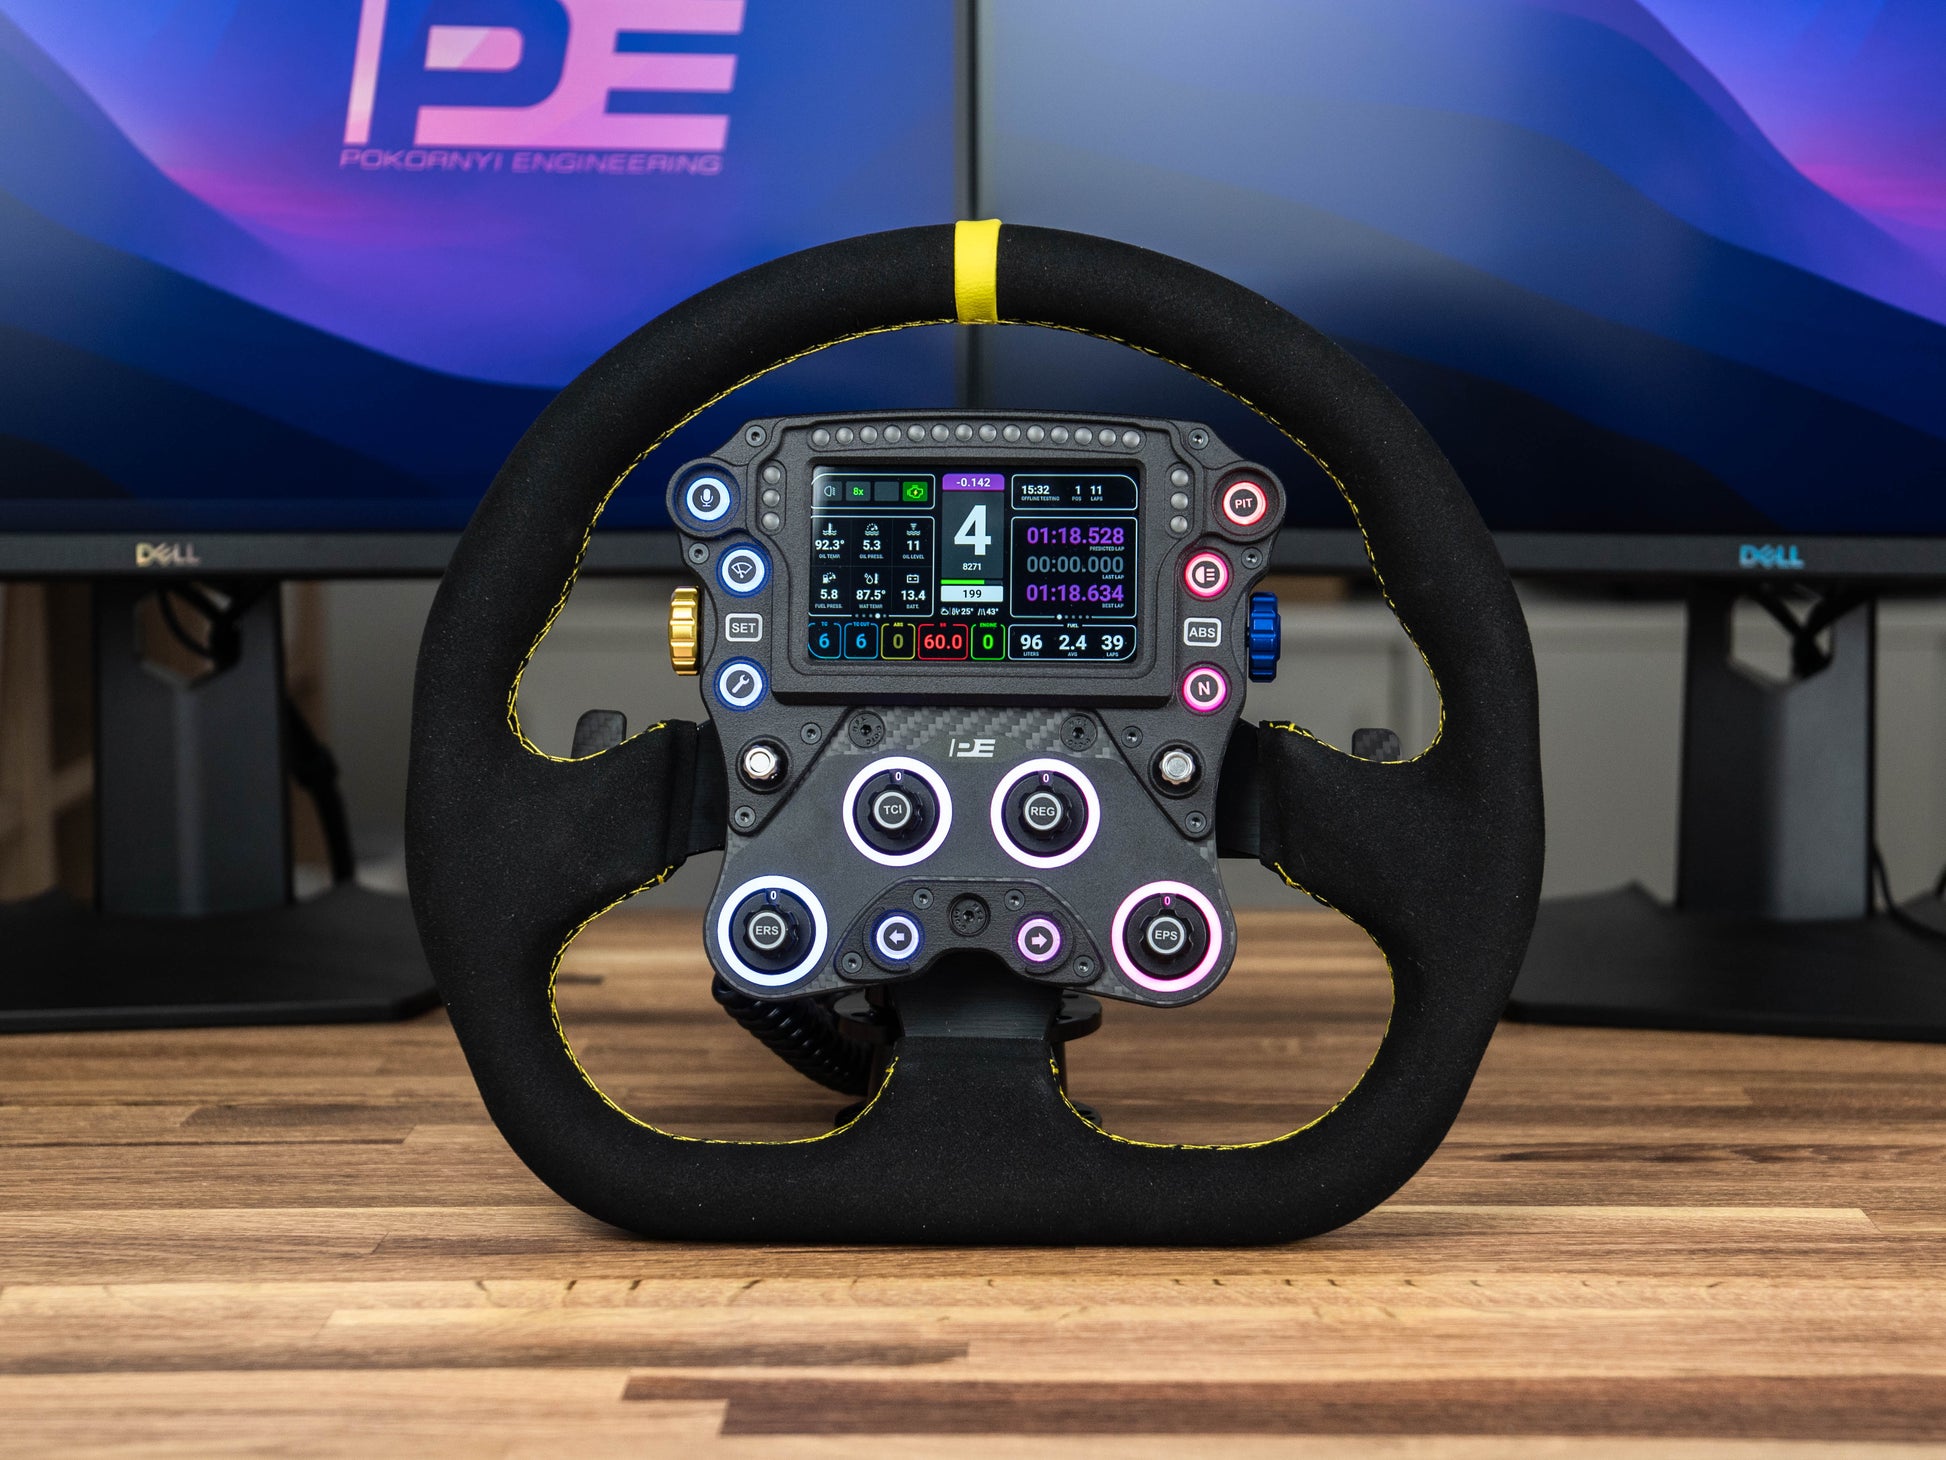 GTB Pro DIY sim racing button box with RGB rotary encoders, buttons and 4.3 screen mounted on the Pokornyi Engineering D330 steering wheel